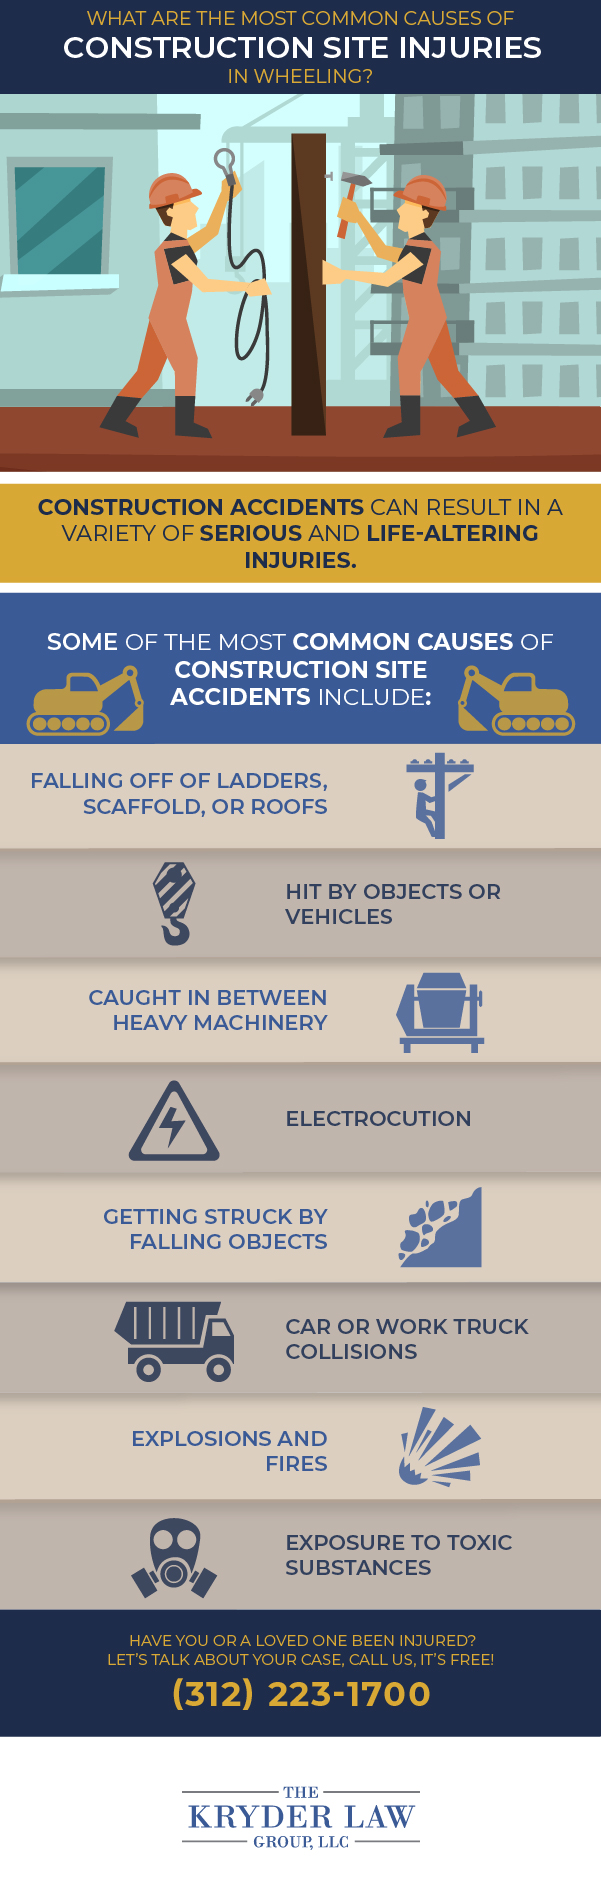 The Benefits of Hiring a Wheeling Construction Accident Lawyer Infographic